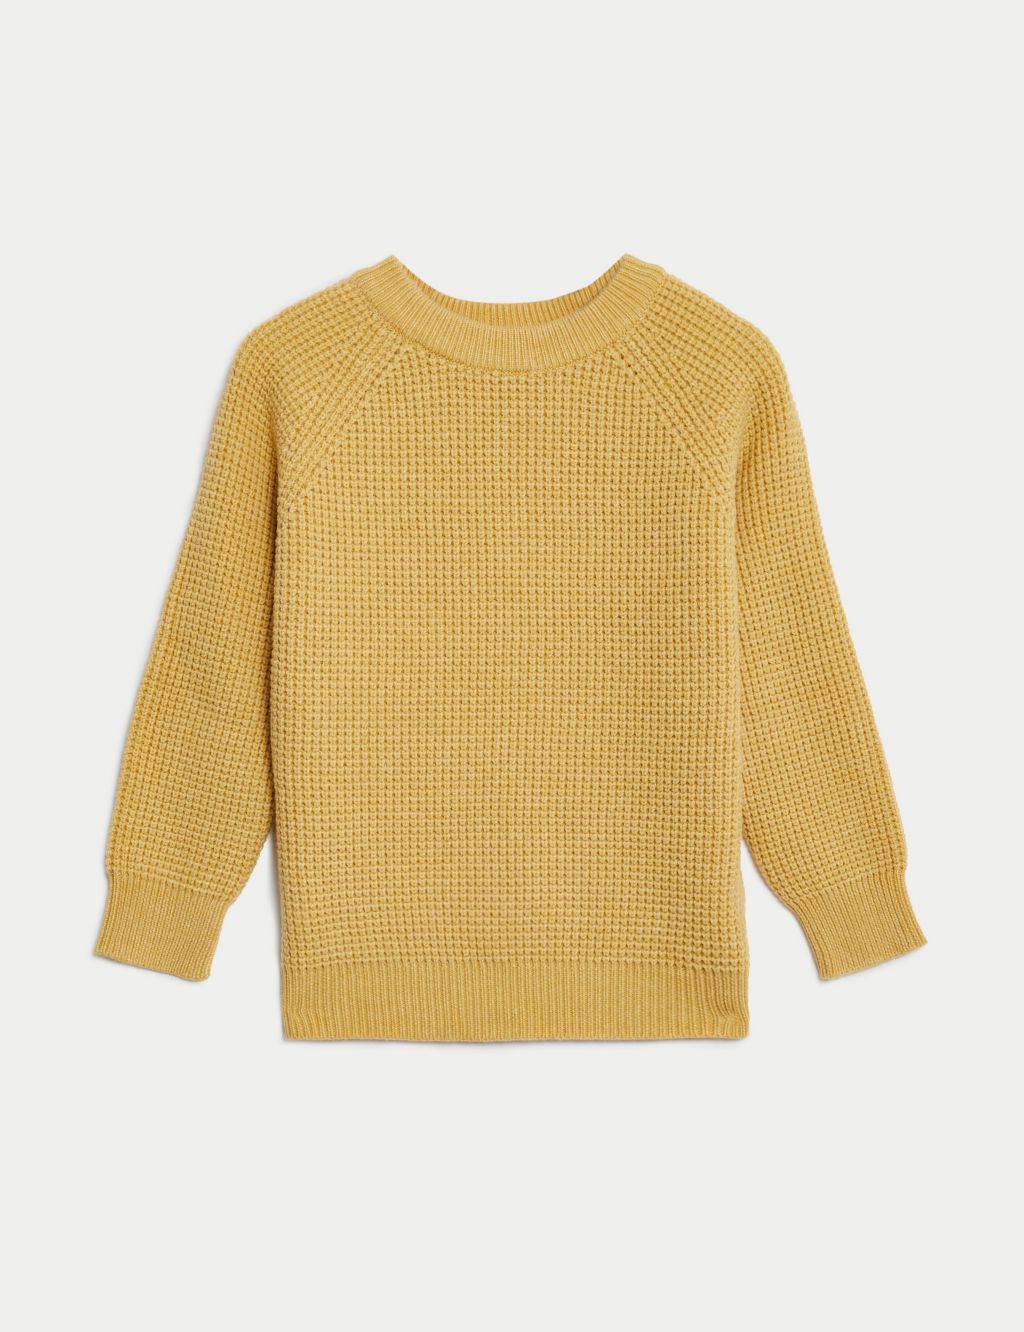 Cotton Blend Knitted Jumper (2-8 Yrs) image 2